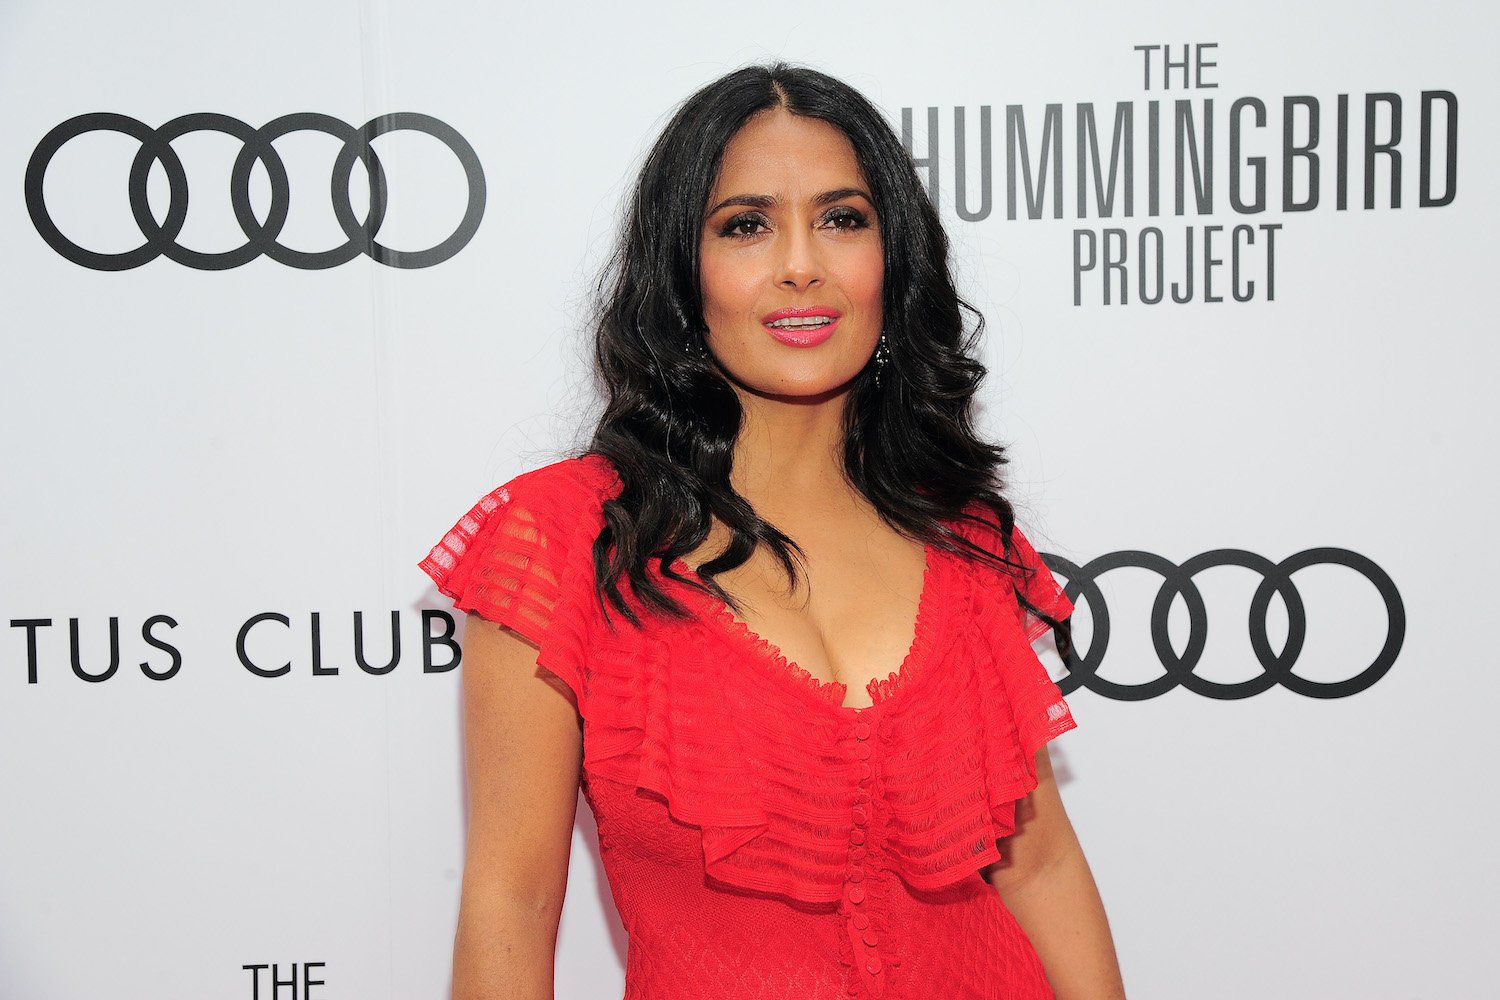 Salma Hayek attends Post-Screening Event For 'The Hummingbird Project' during the Toronto International Film Festival wearing a red dress